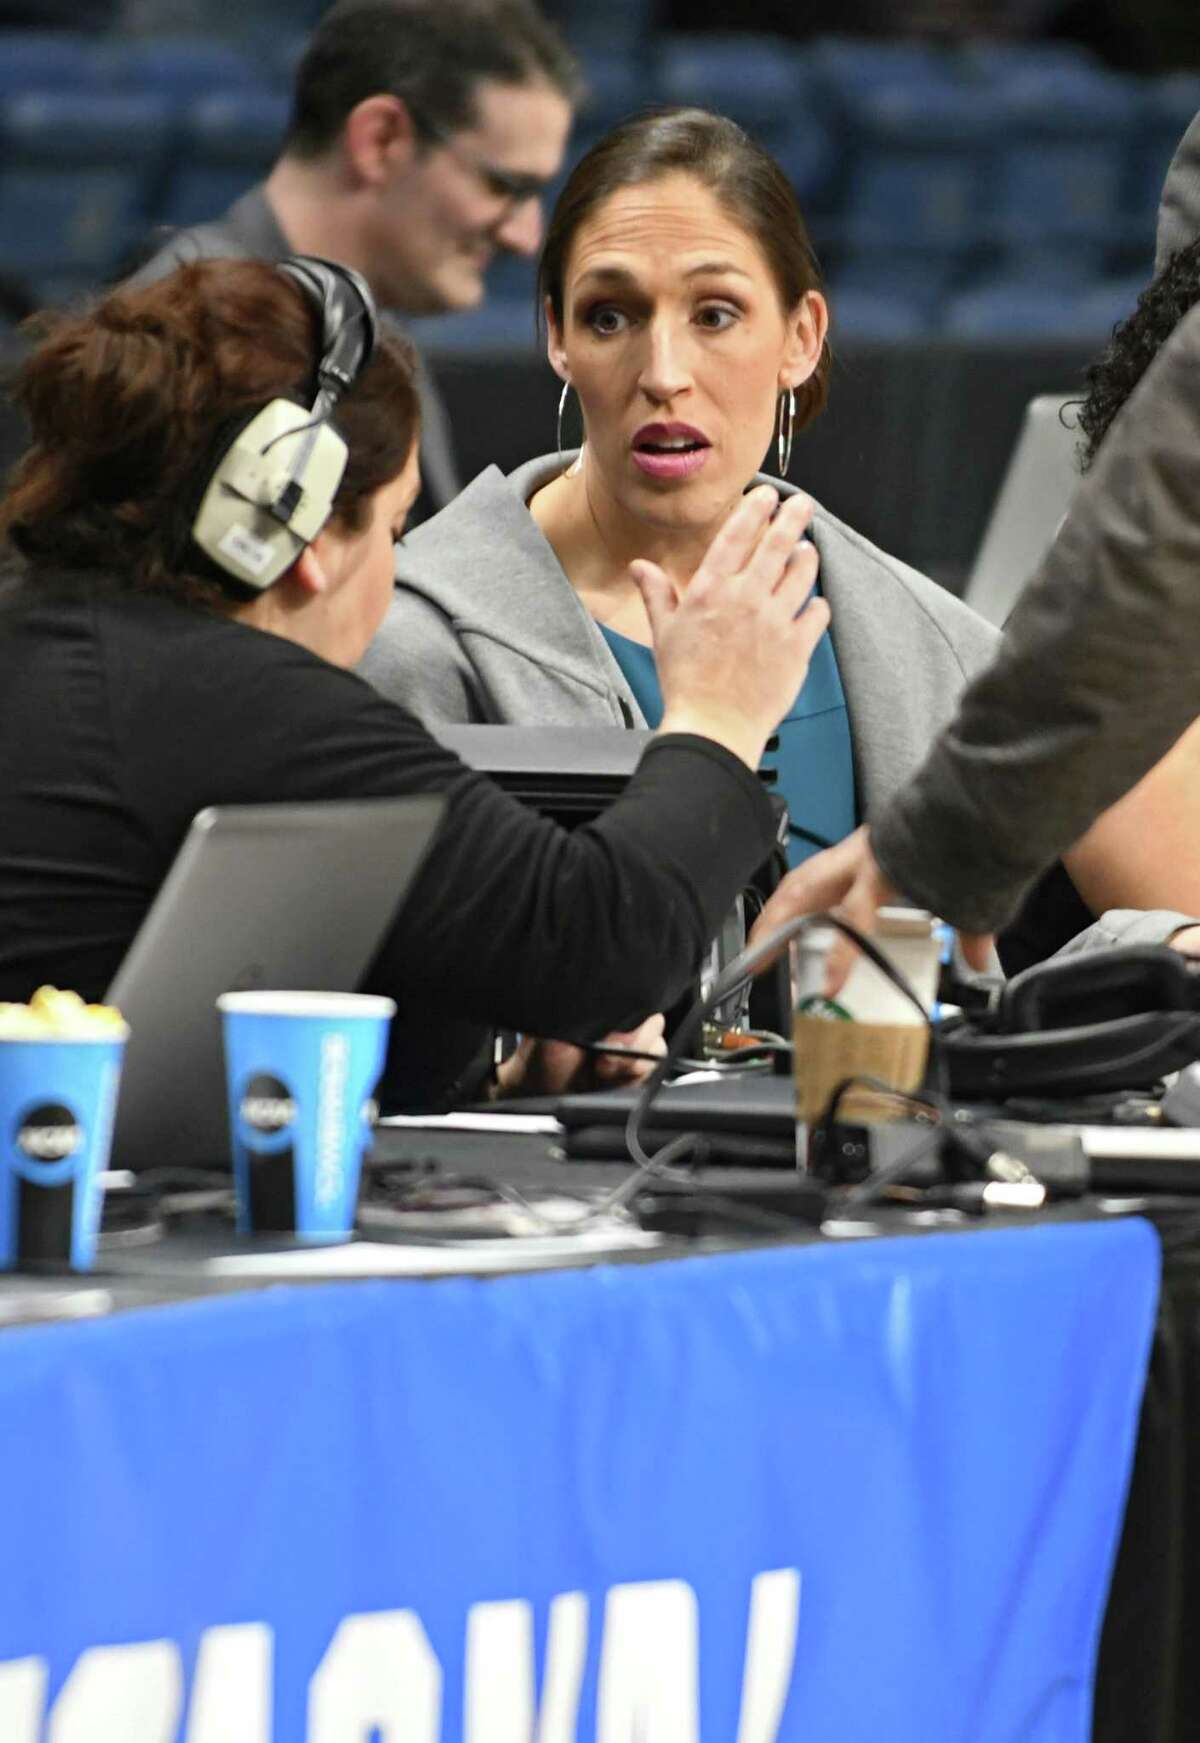 Television basketball analyst and former WNBA women's basketball player Rebecca Lobo is seen working on the sideline at the NCAA Women's Basketball regional final between UConn and South Carolina at the Times Union Center on Monday, March 26, 2018 in Albany, N.Y. (Lori Van Buren/Times Union)